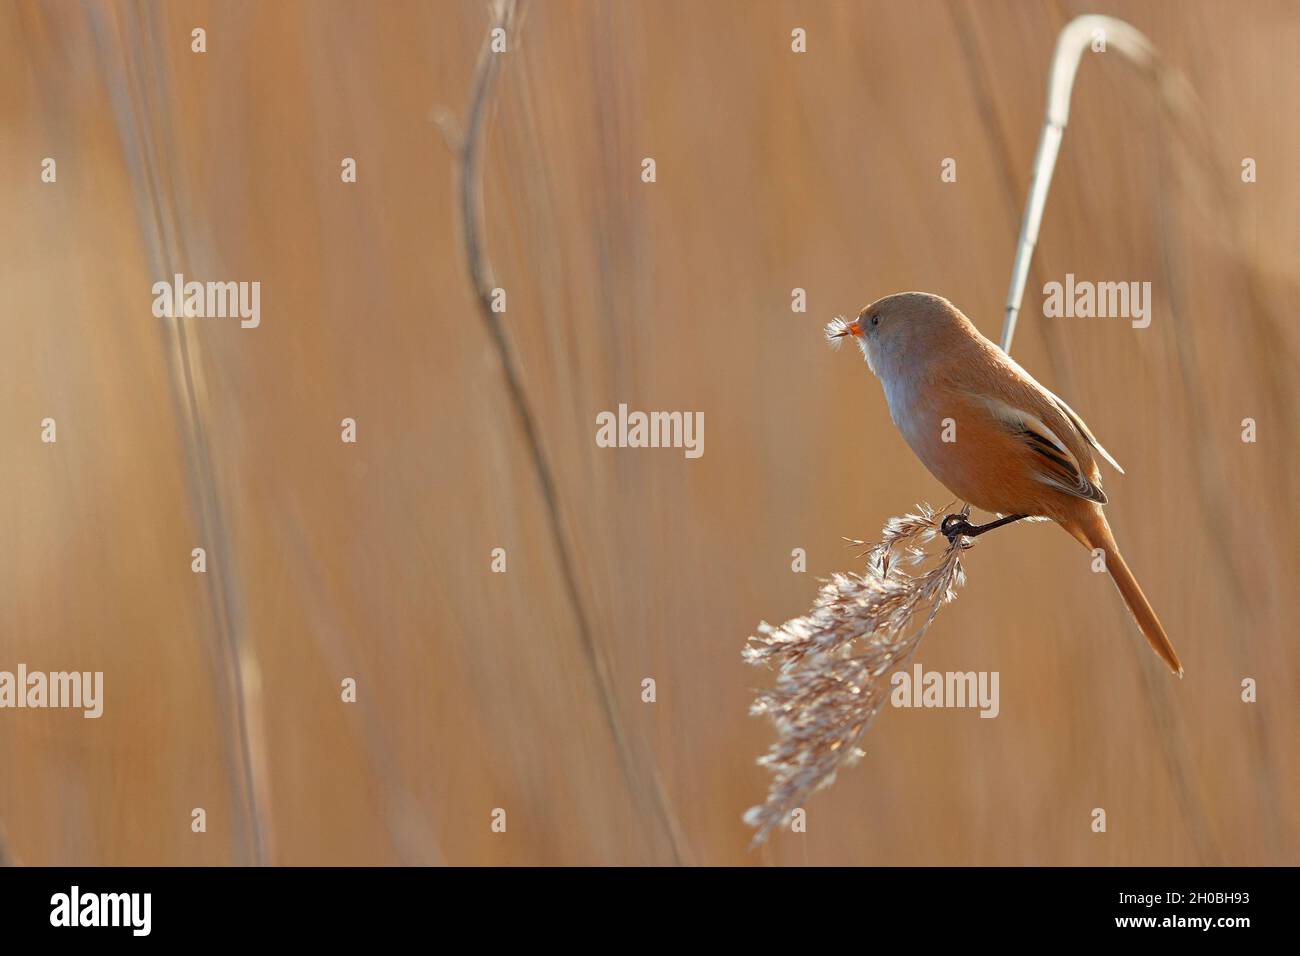 Bearded reedling (Panurus biarmicus) in a reedbed, Baie de Somme, France. Stock Photo